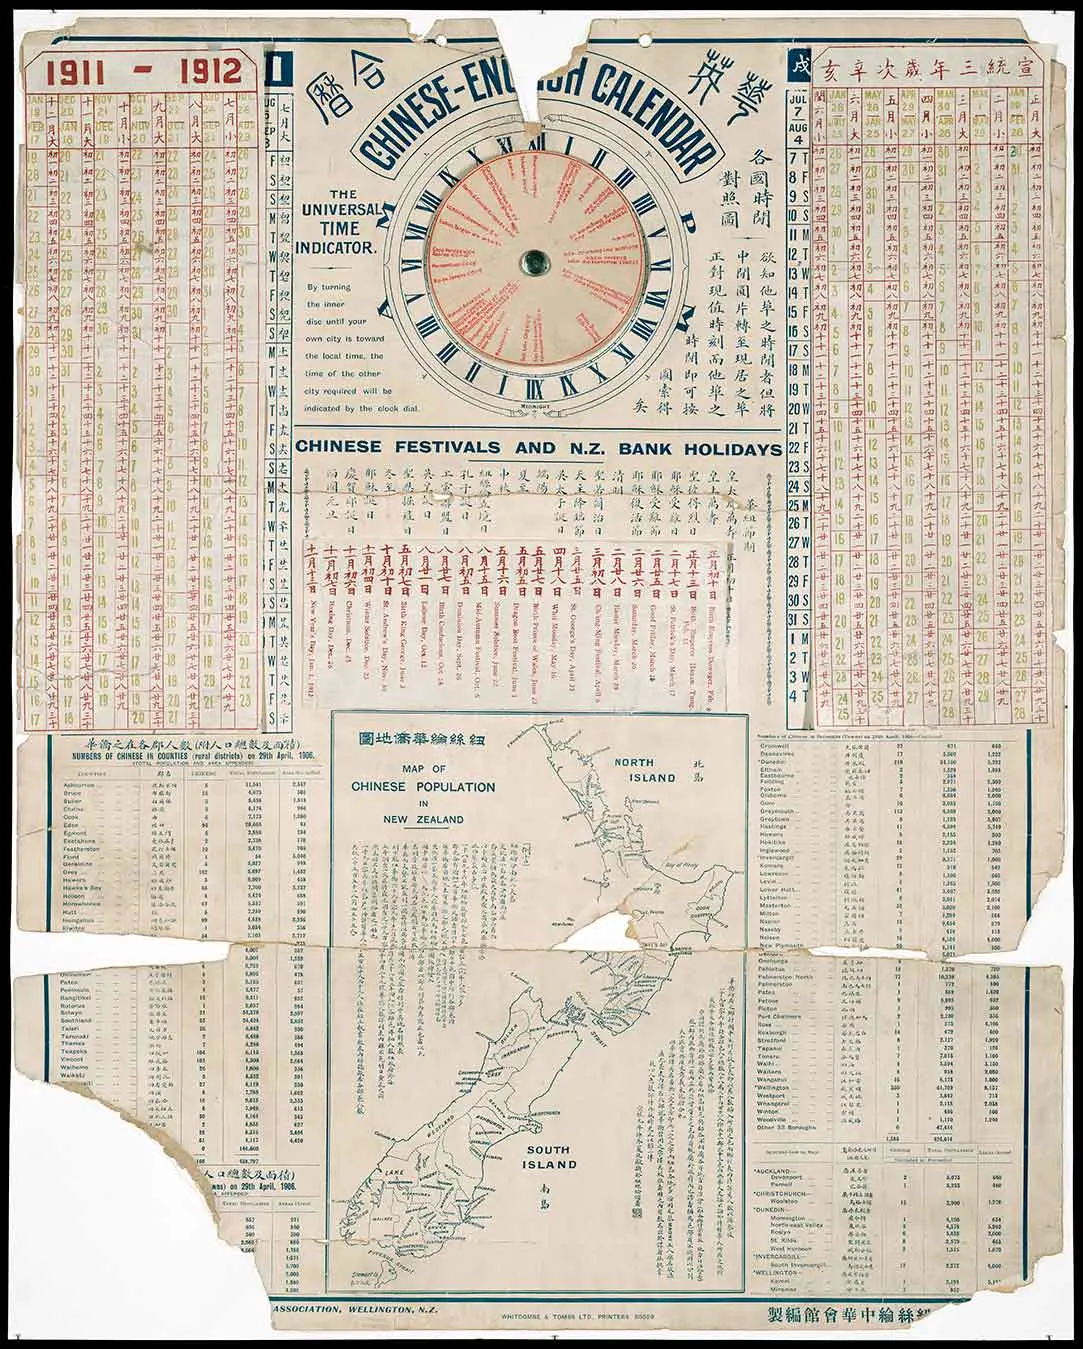 Printed calendar poster in Chinese and English. It shows a calendar for 1910 to 1911 with additional panels for 1911 to 1912. At the top of the poster is a dial to calculate the time of day in different parts of the world. 